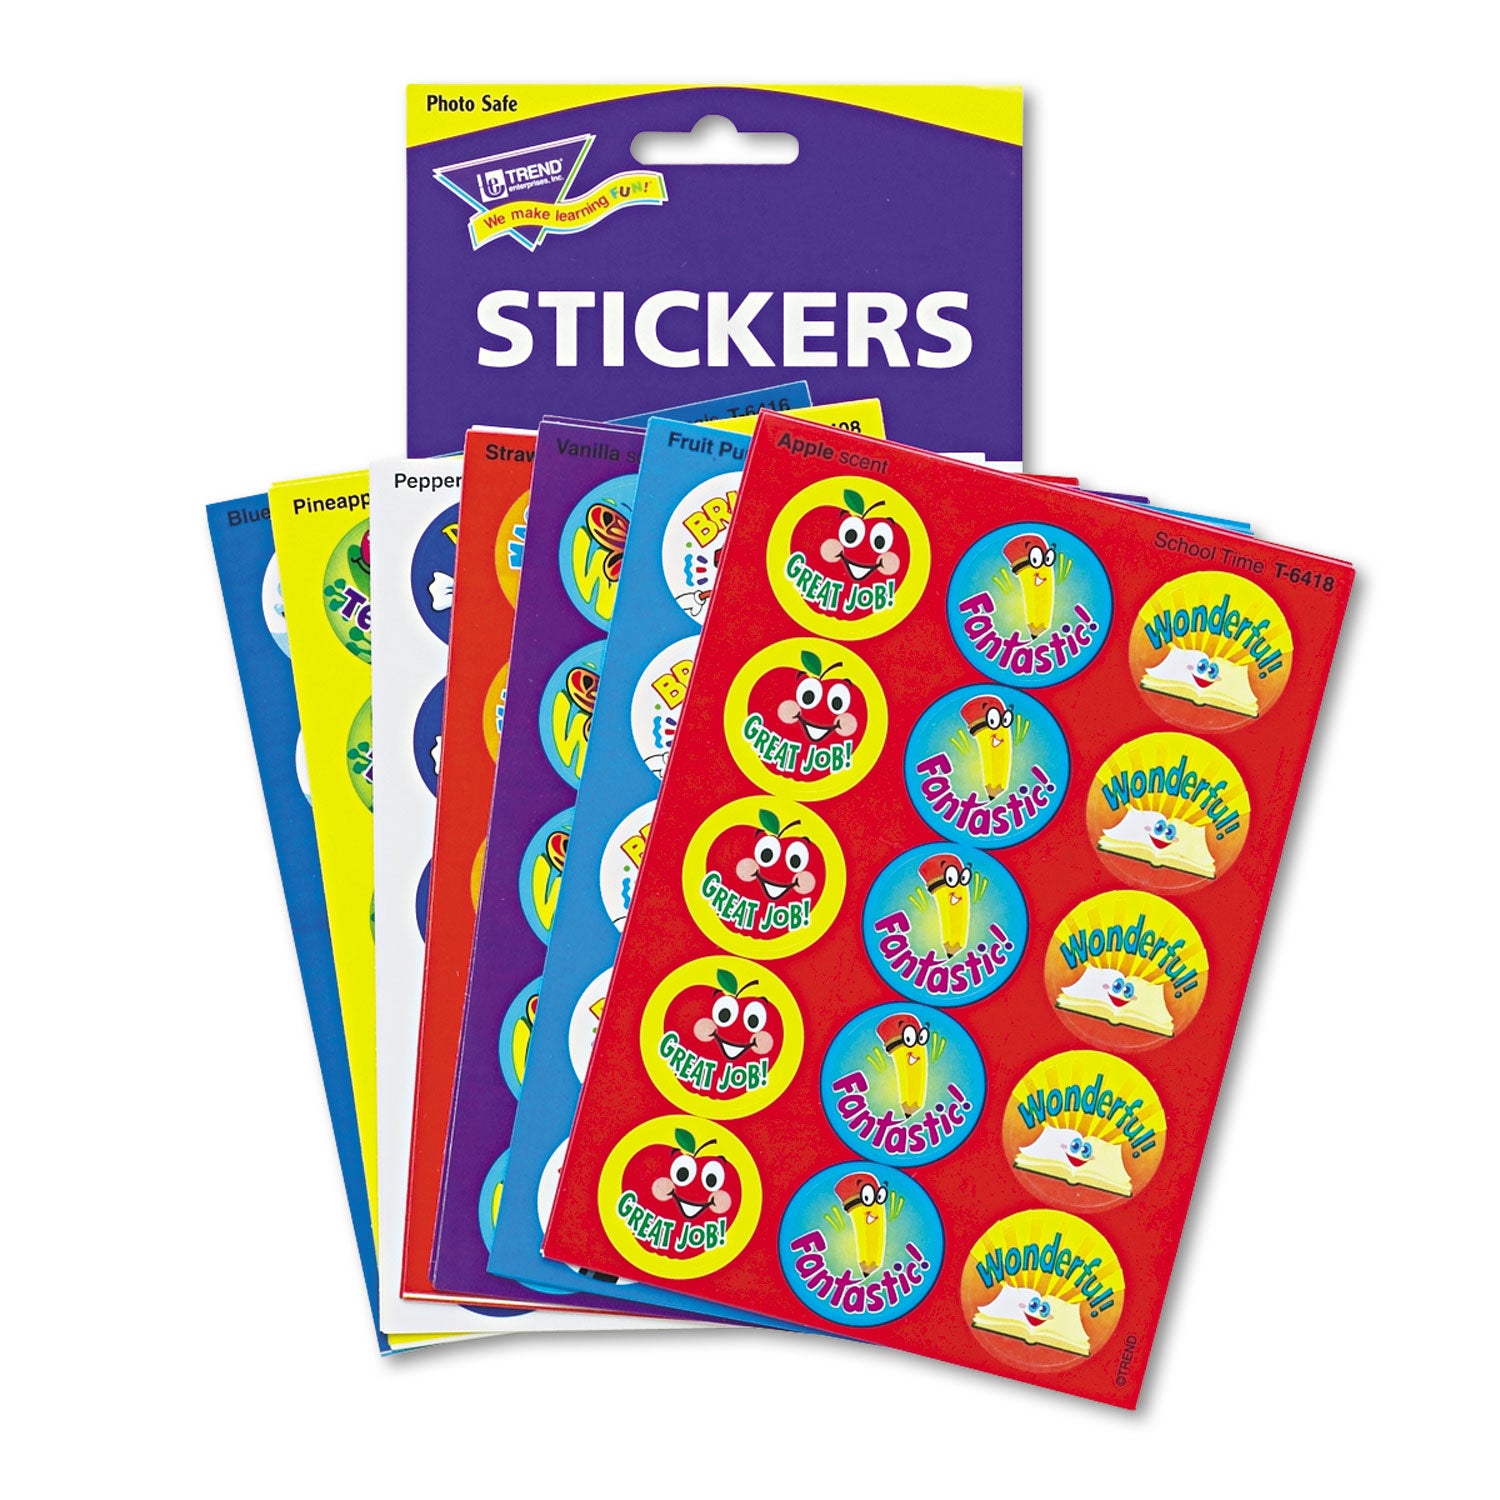 Stinky Stickers Variety Pack, Positive Words, Assorted Colors, 300/Pack - 